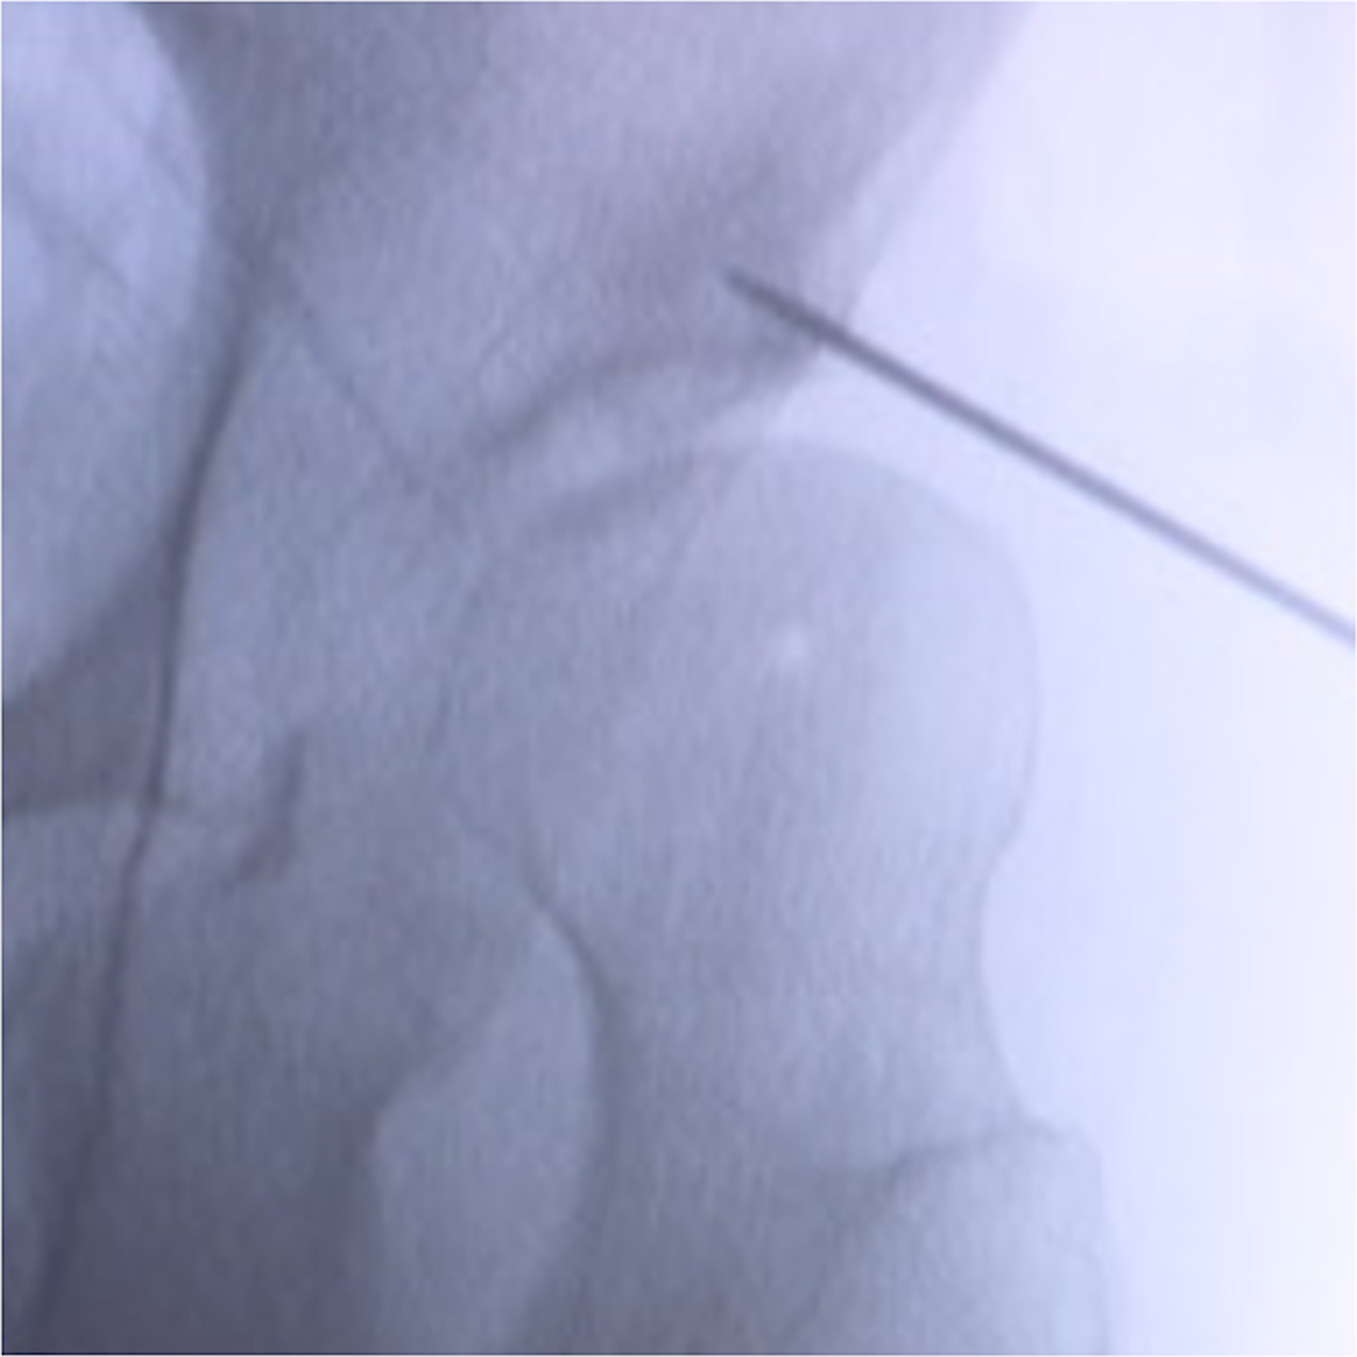 Fig. 1 
            Intraoperative anteroposterior radiograph using a fluoroscope. During the surgery, two 2.0 mm Kirschner (K-) wires were temporarily inserted, one each from the anterior and posterior ends of the bone slot, and were pointed in the direction of the planned shelf. The height and orientation of the shelf were determined under fluoroscopy, based on findings from these two K-wires.
          